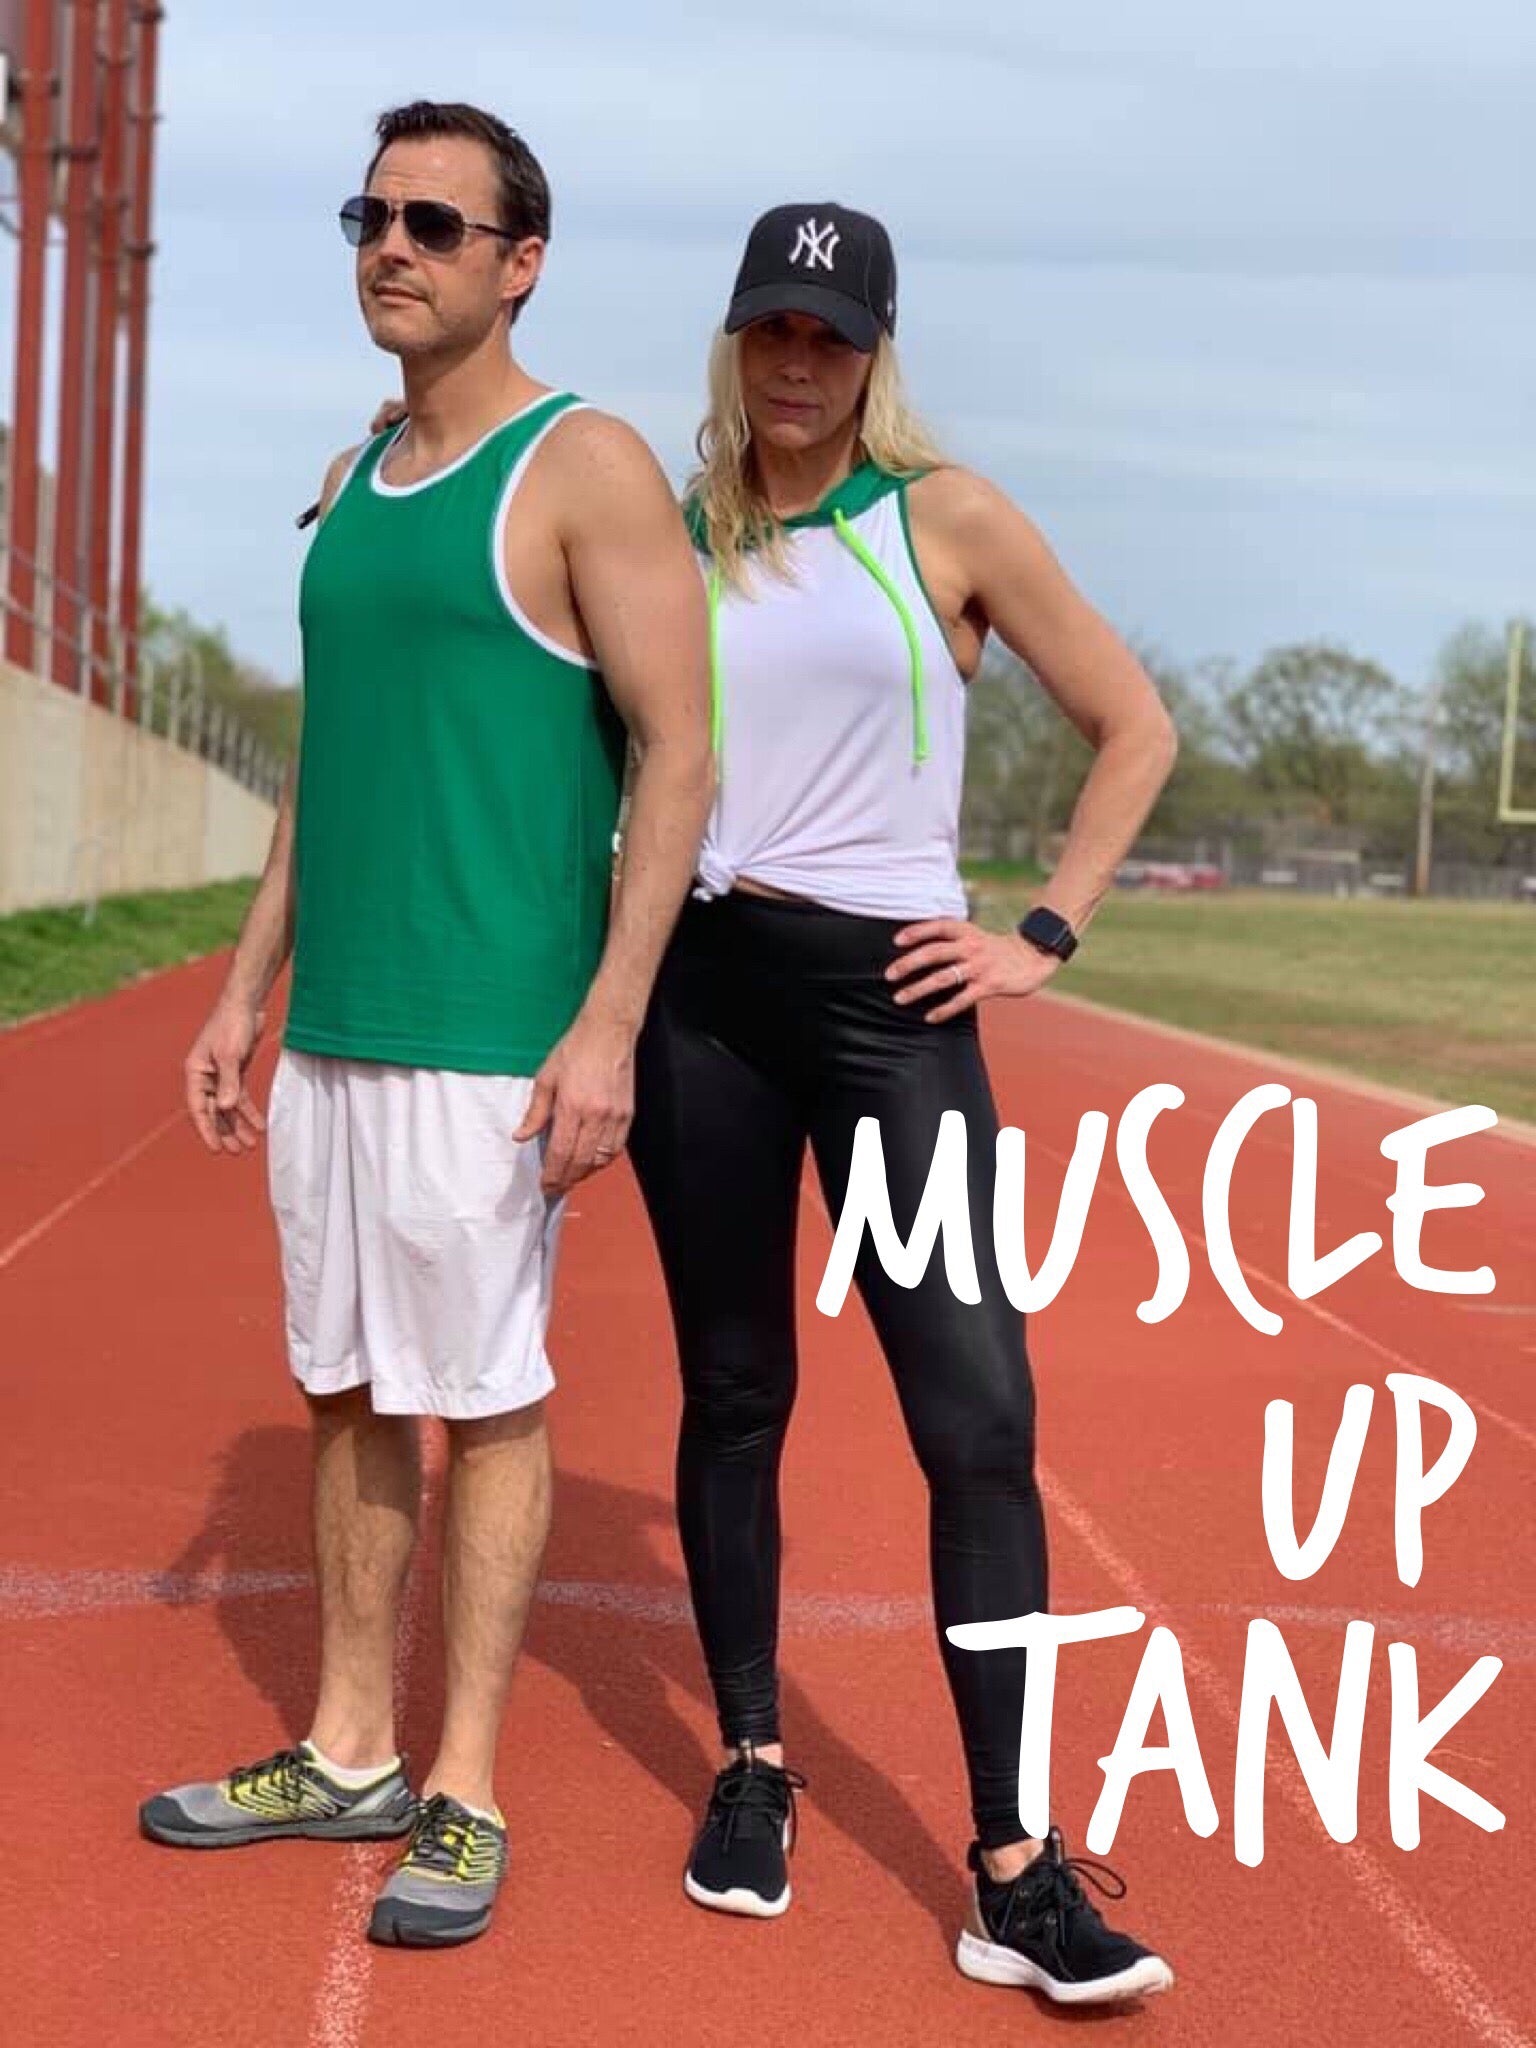 New Pattern Release: The Muscle Up Tank